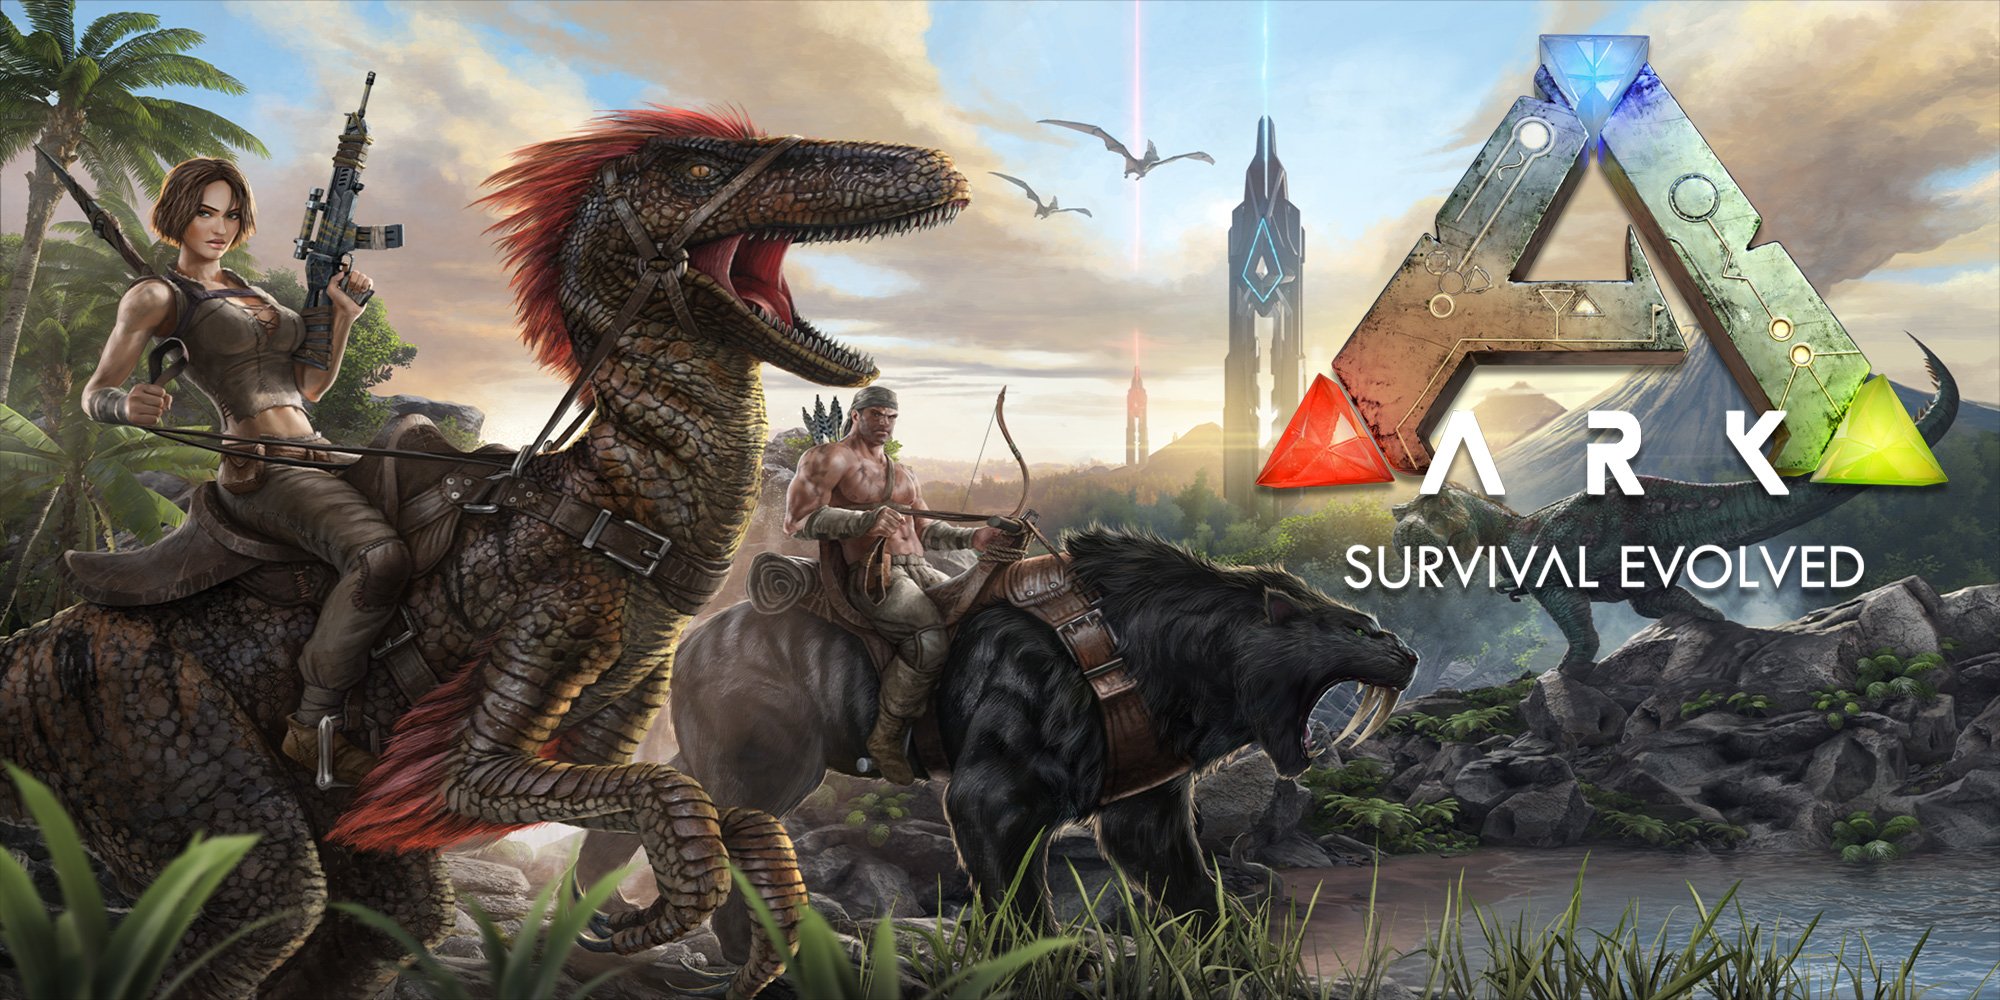 Ark 2 Has Been Delayed And The First Game Is Getting A Remaster